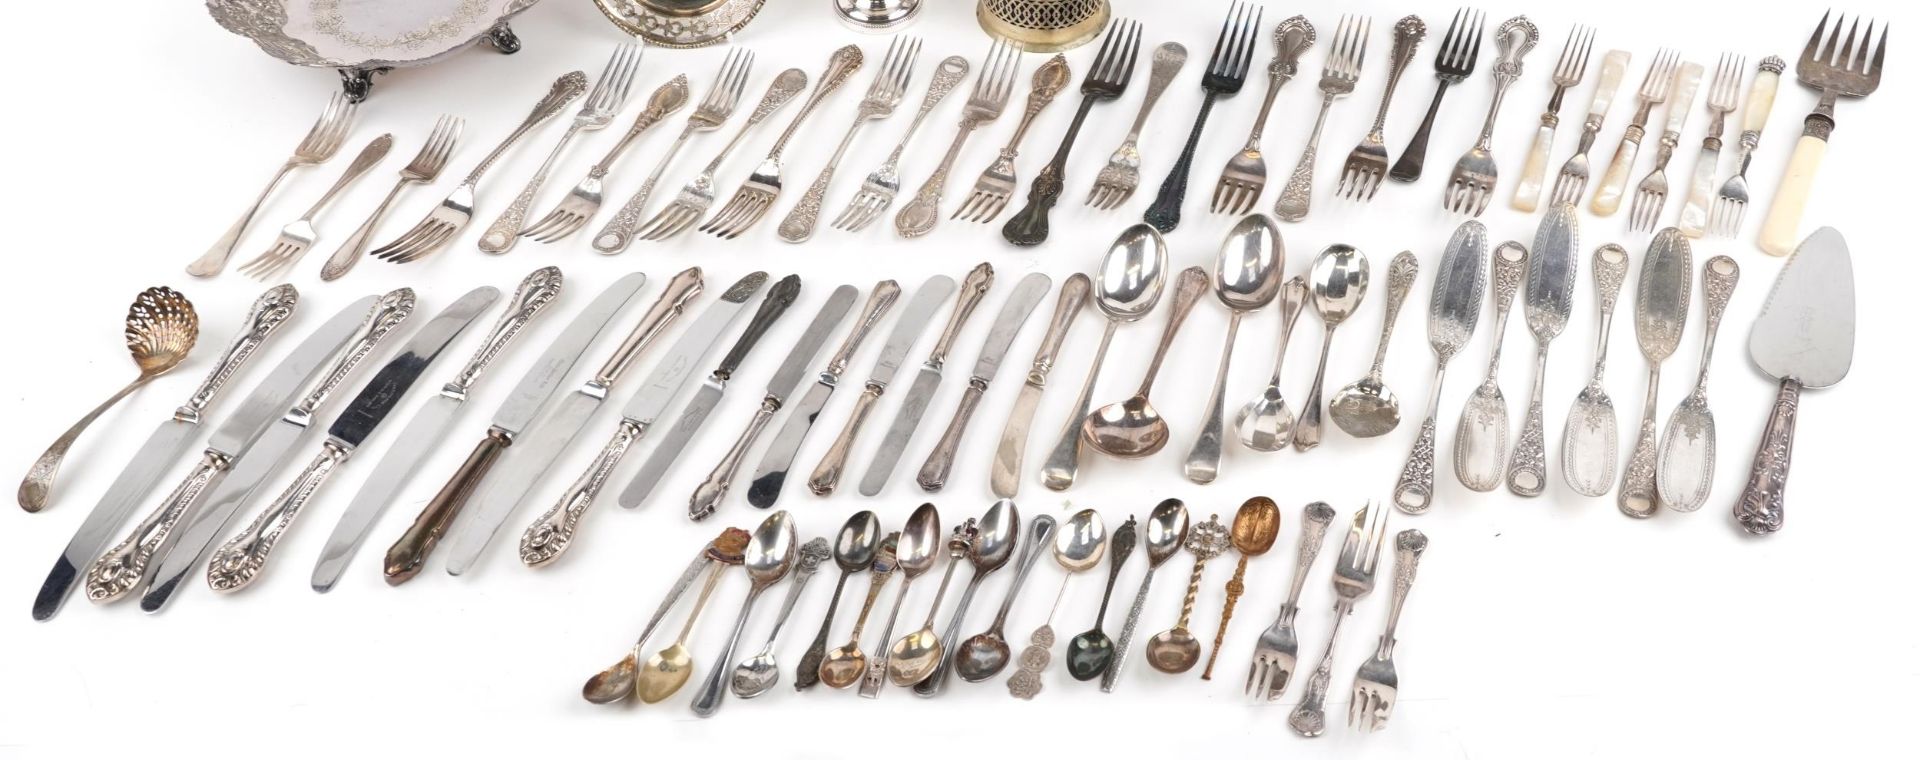 19th century and later metalware including aesthetic flatware by John Dixon & Sons and Middle - Image 3 of 3